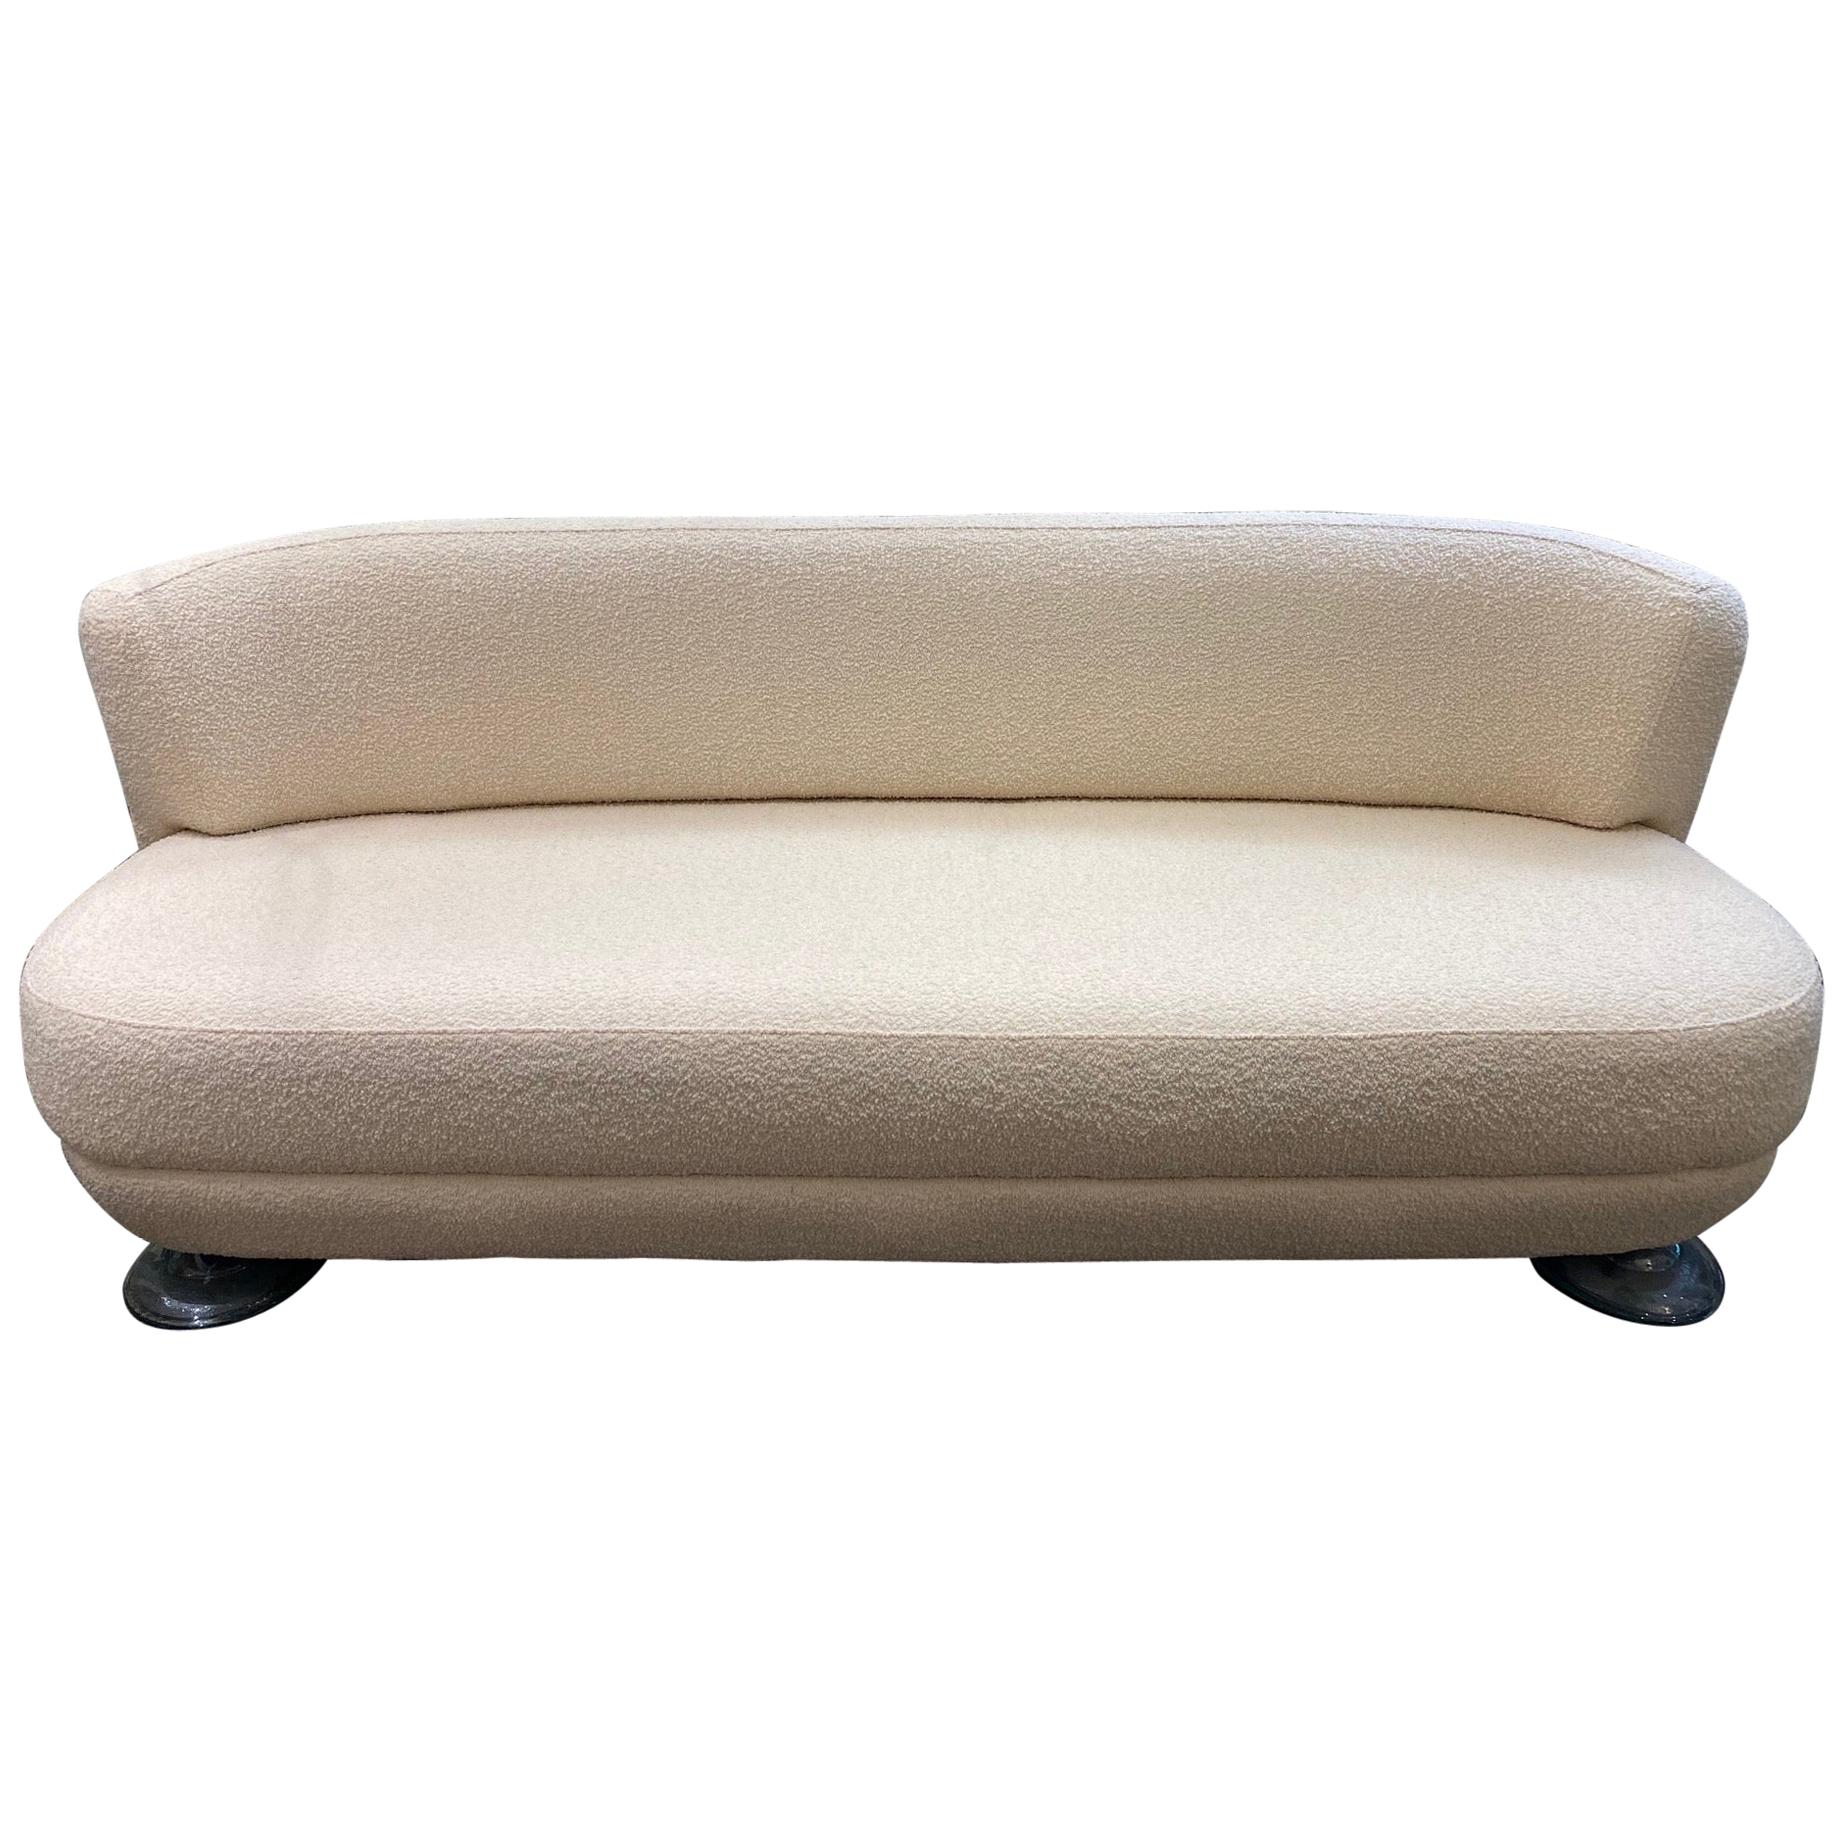 French Andrée Putman Restored and Reupholstered Boucle Ivory Sofa, circa 2001